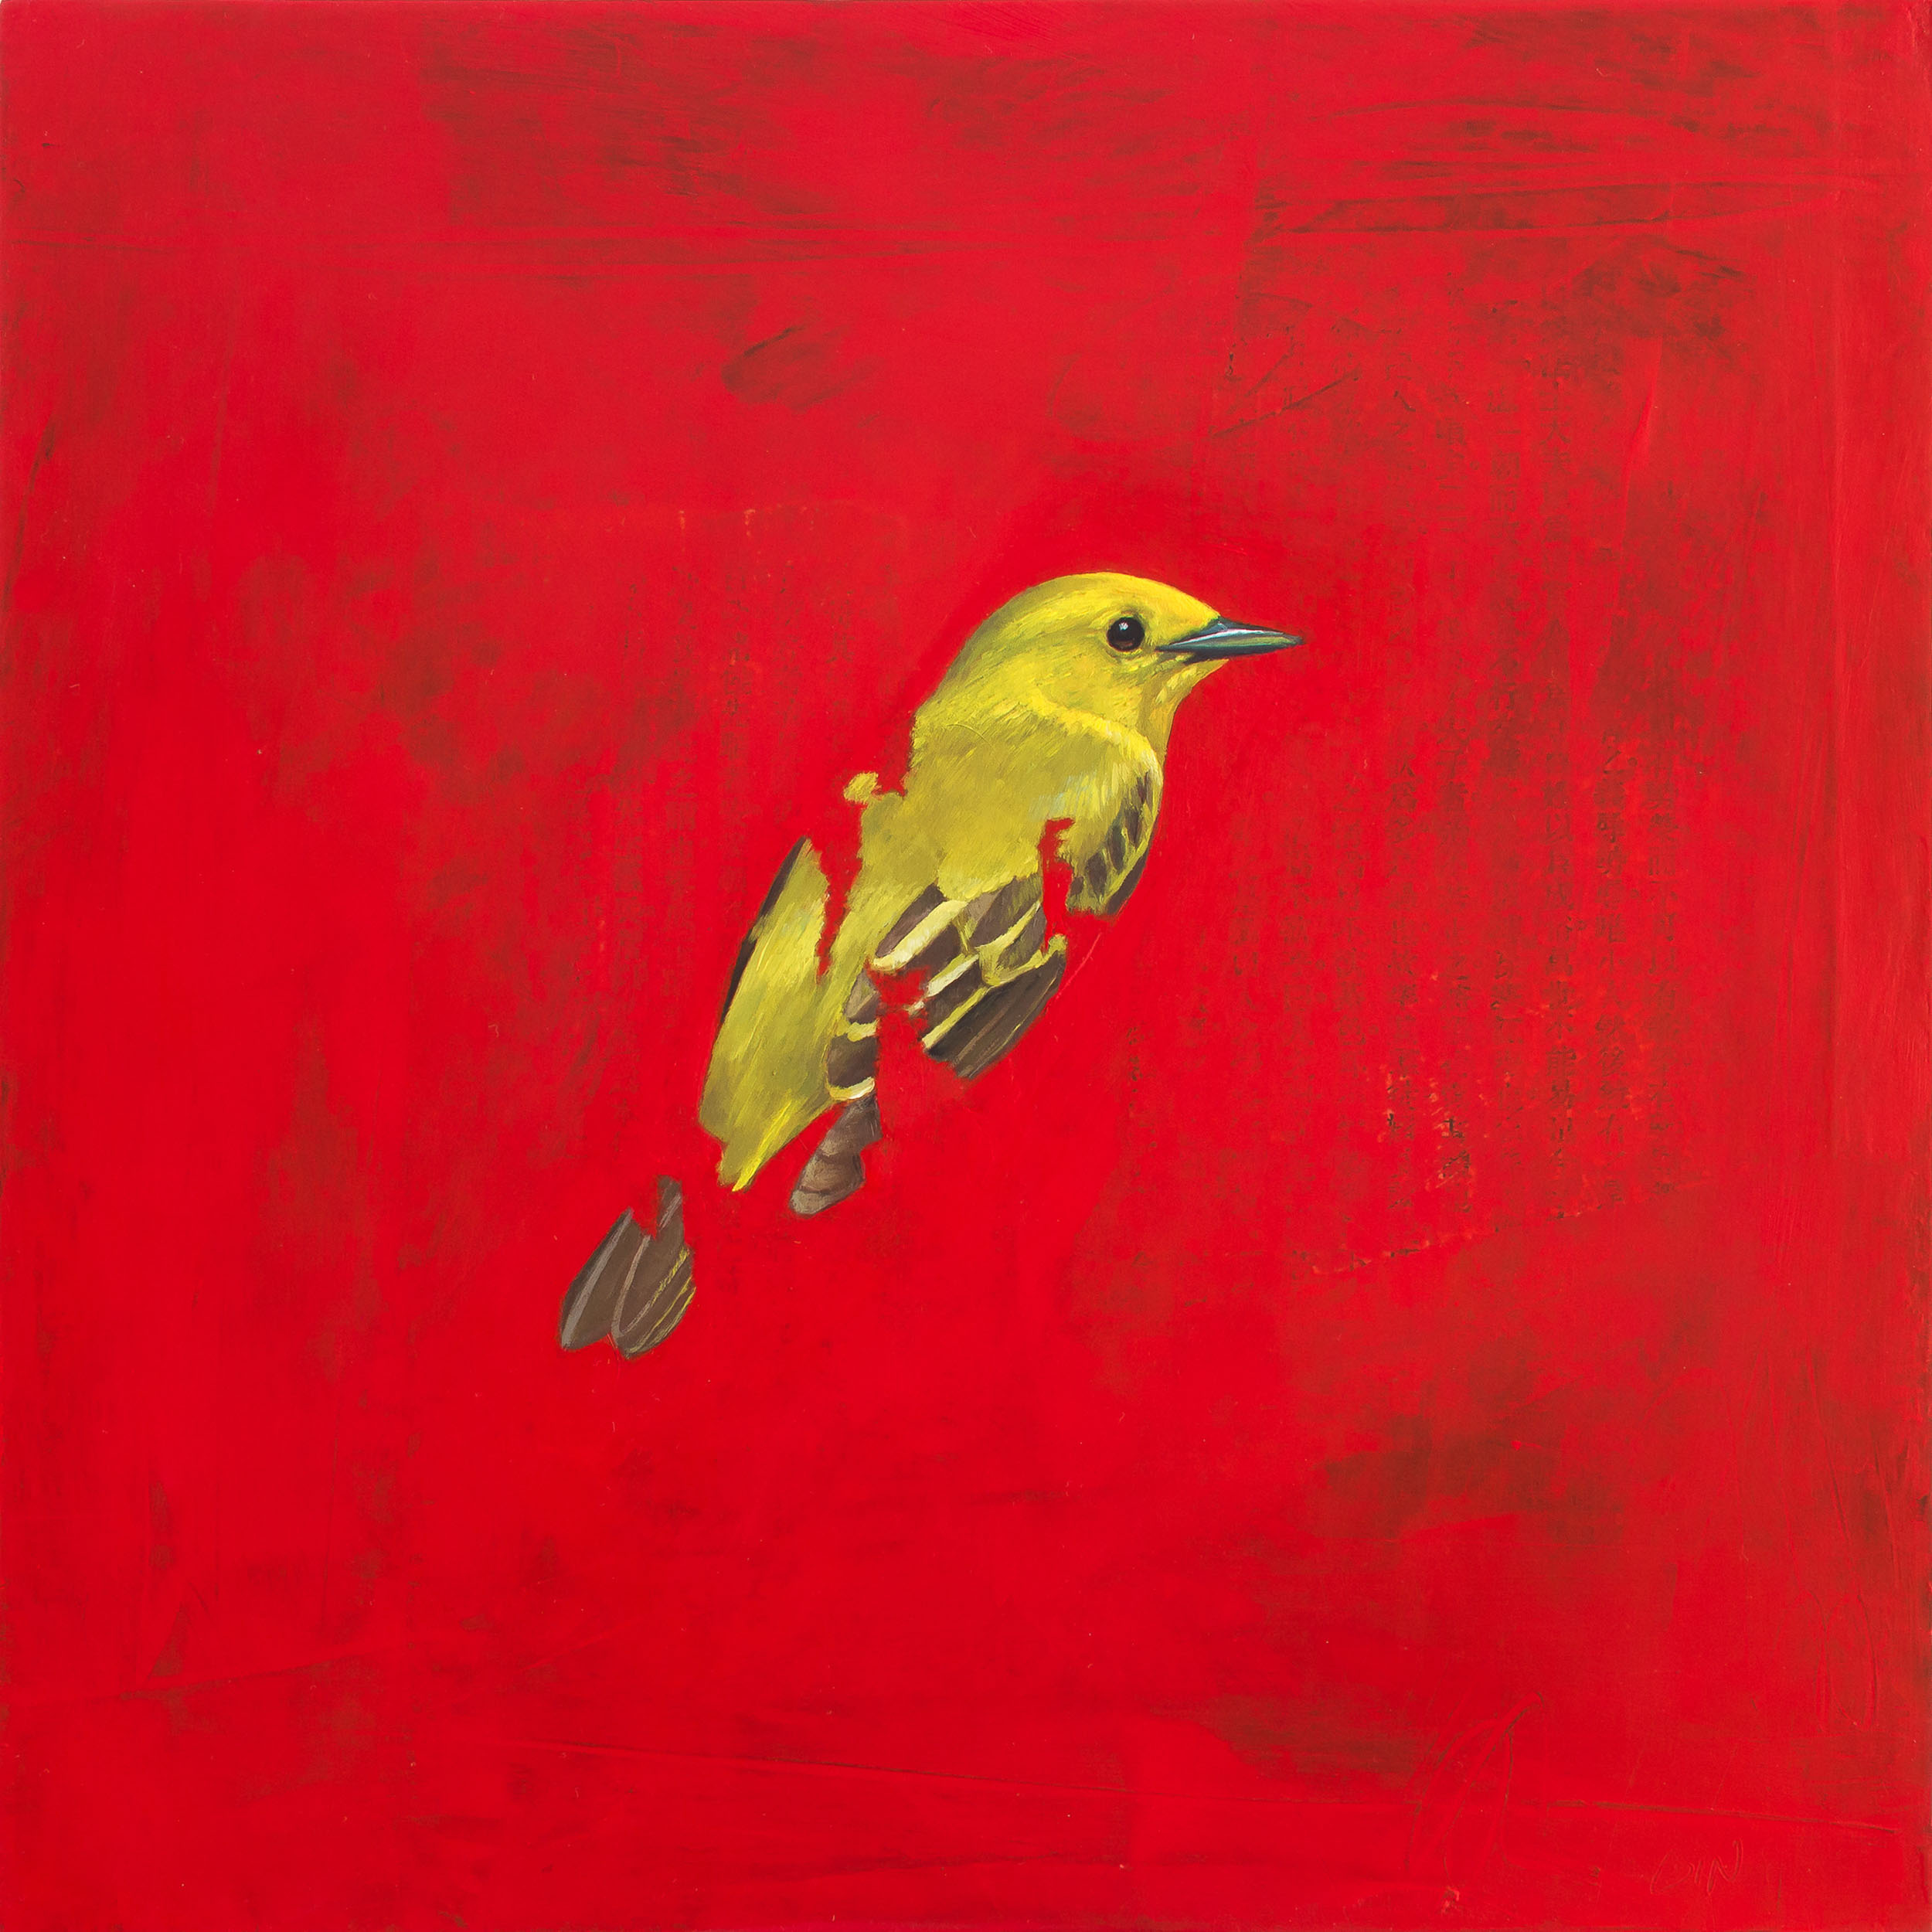   Yellow Warbler  2019 oil and collage on panel 10 x 10 inches  Private Collection 